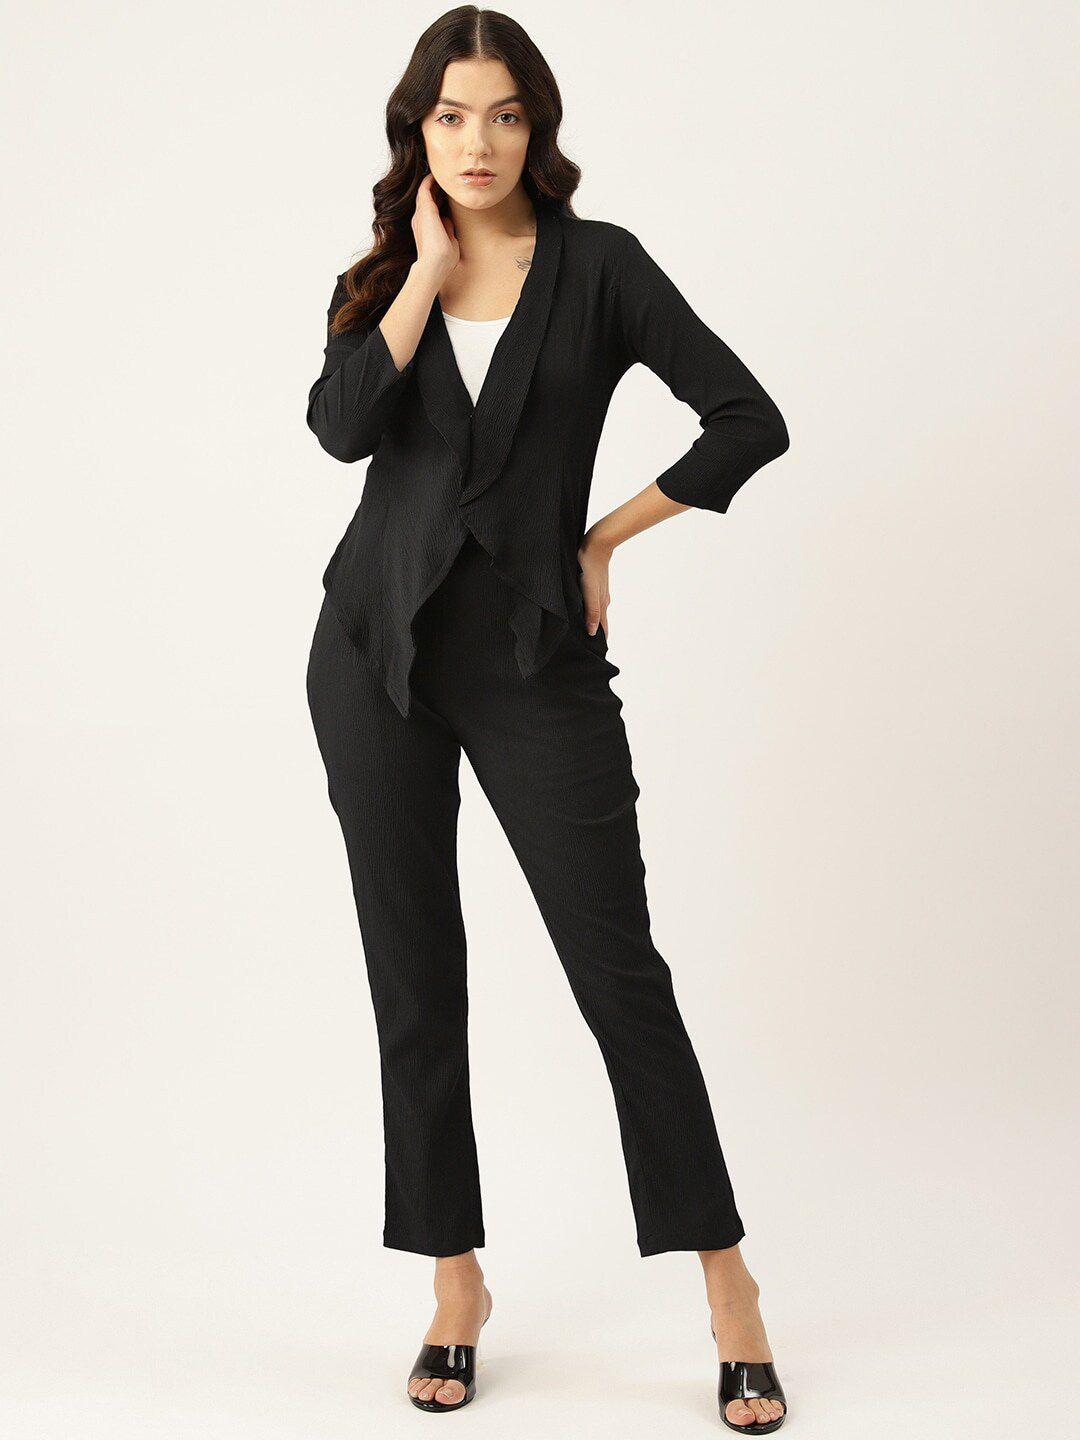 sirikit v-neck long sleeves top with trousers